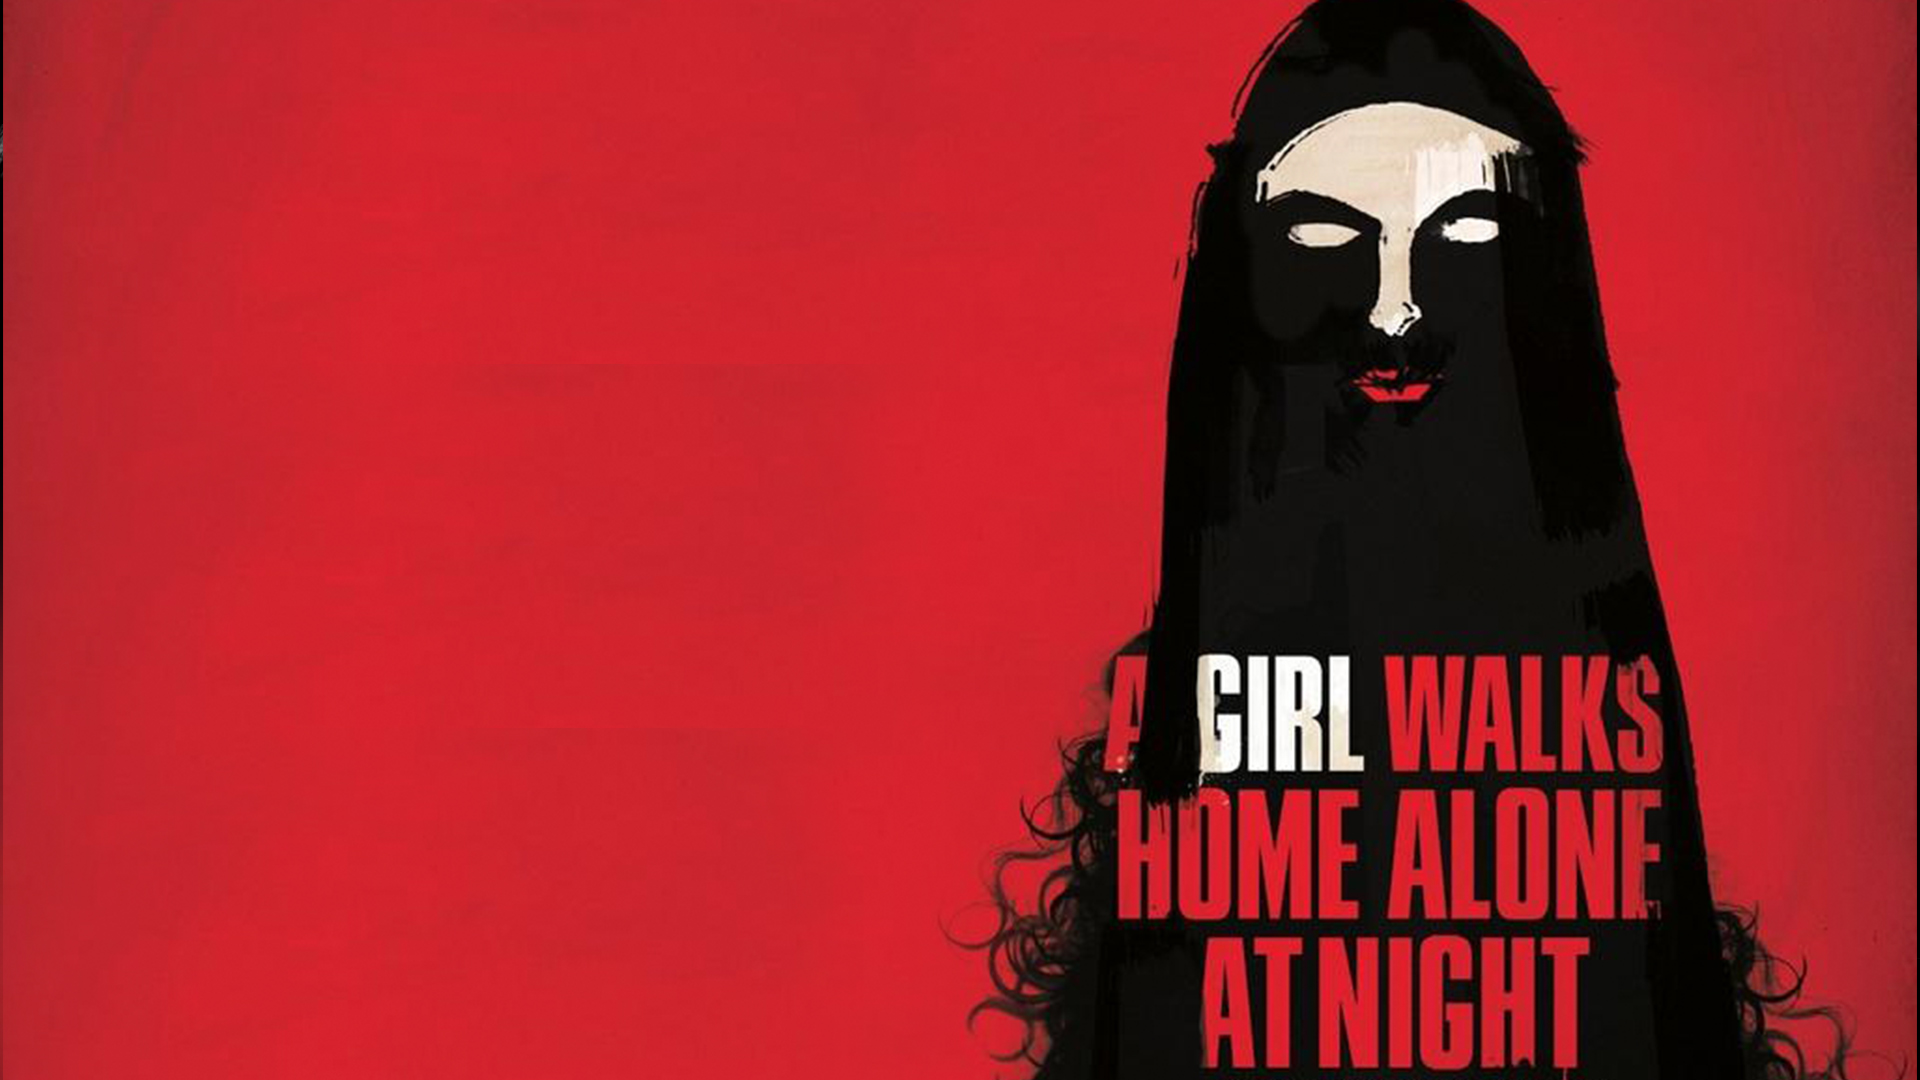 Nice Images Collection: A Girl Walks Home Alone At Night Desktop Wallpapers